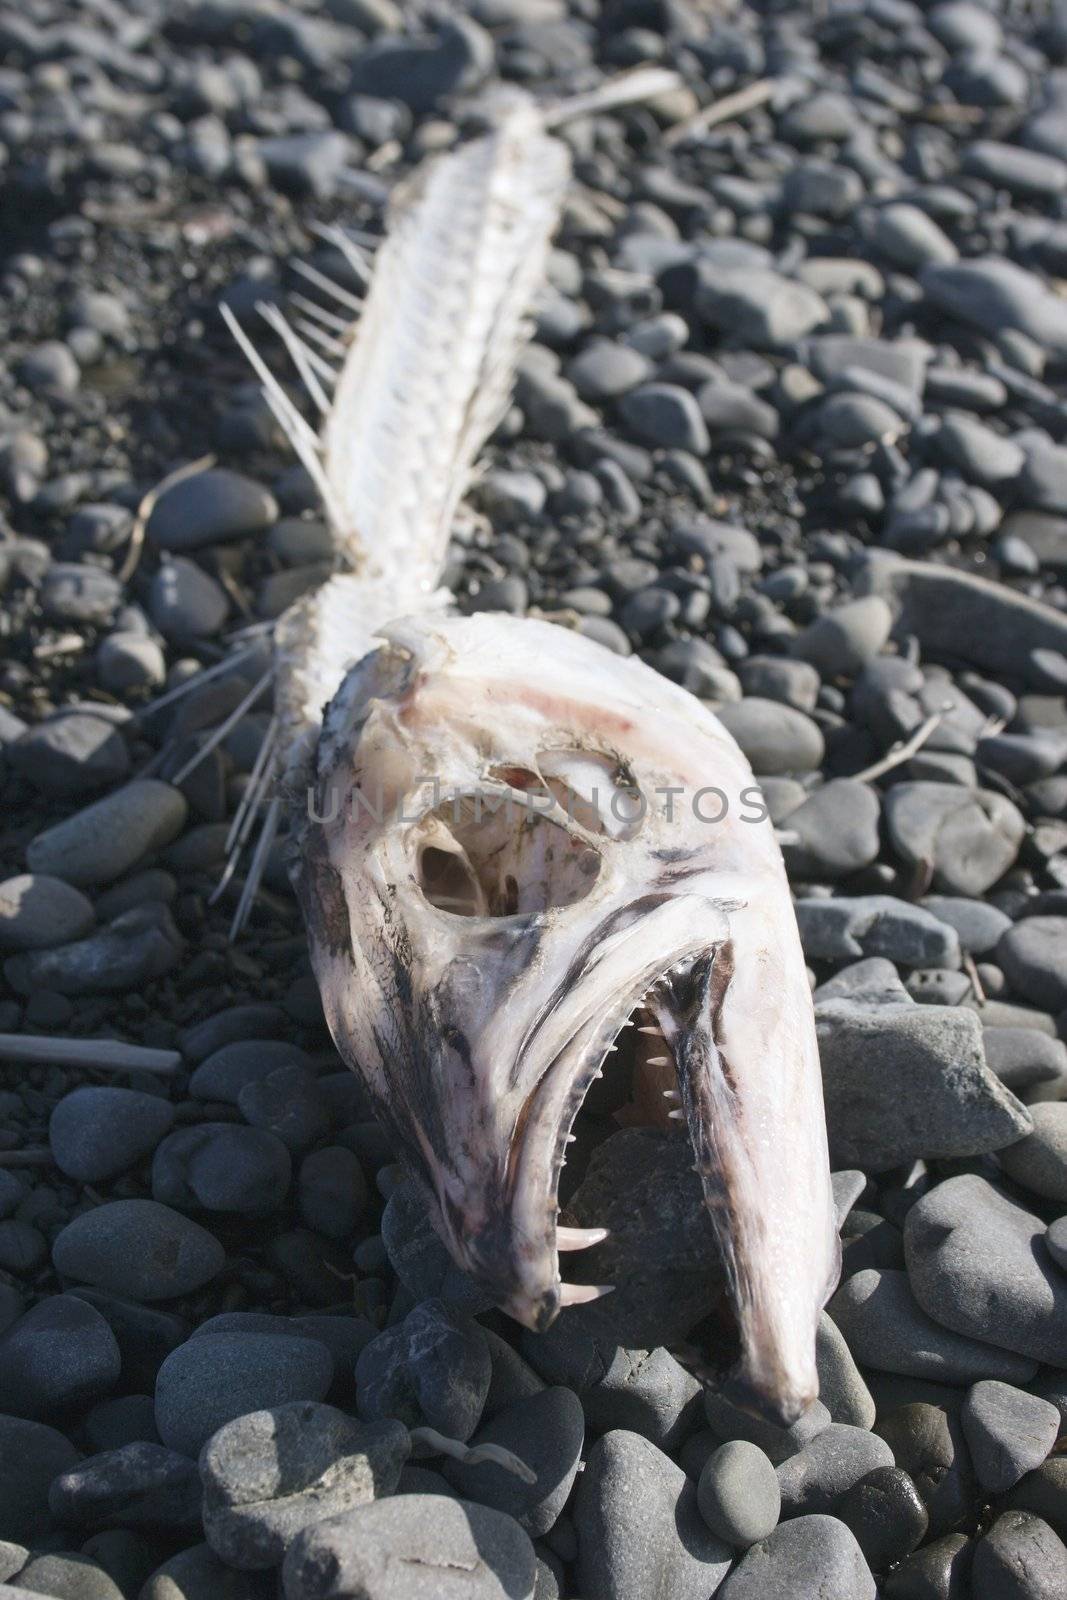 A fish discarded it's skeleton and left it on the beach